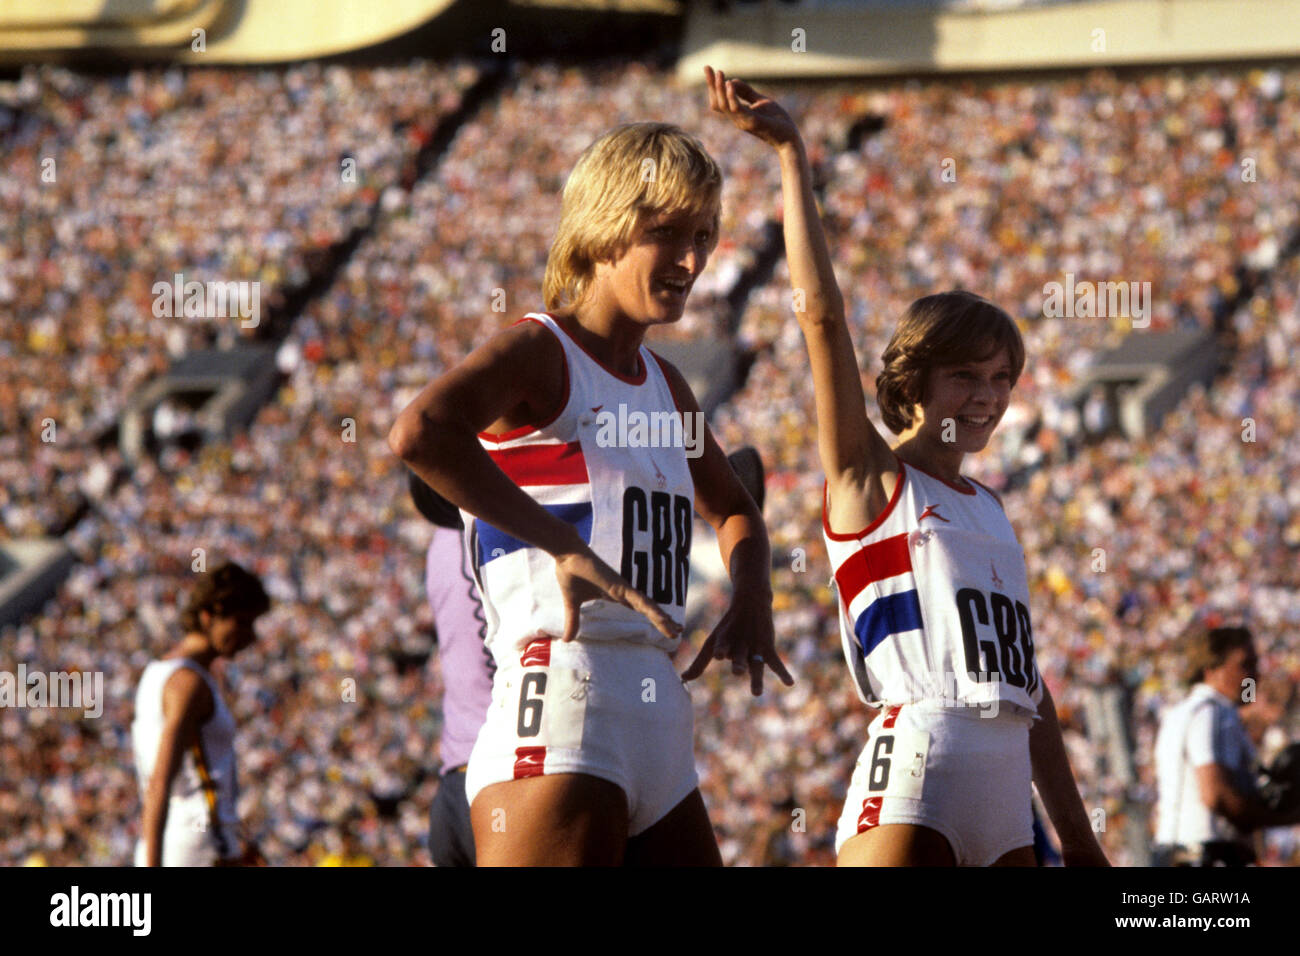 Donna Hartley and Kathy Smallwood of the Great Britain 4x400 metres relay team, who won the bronze medal. Stock Photo